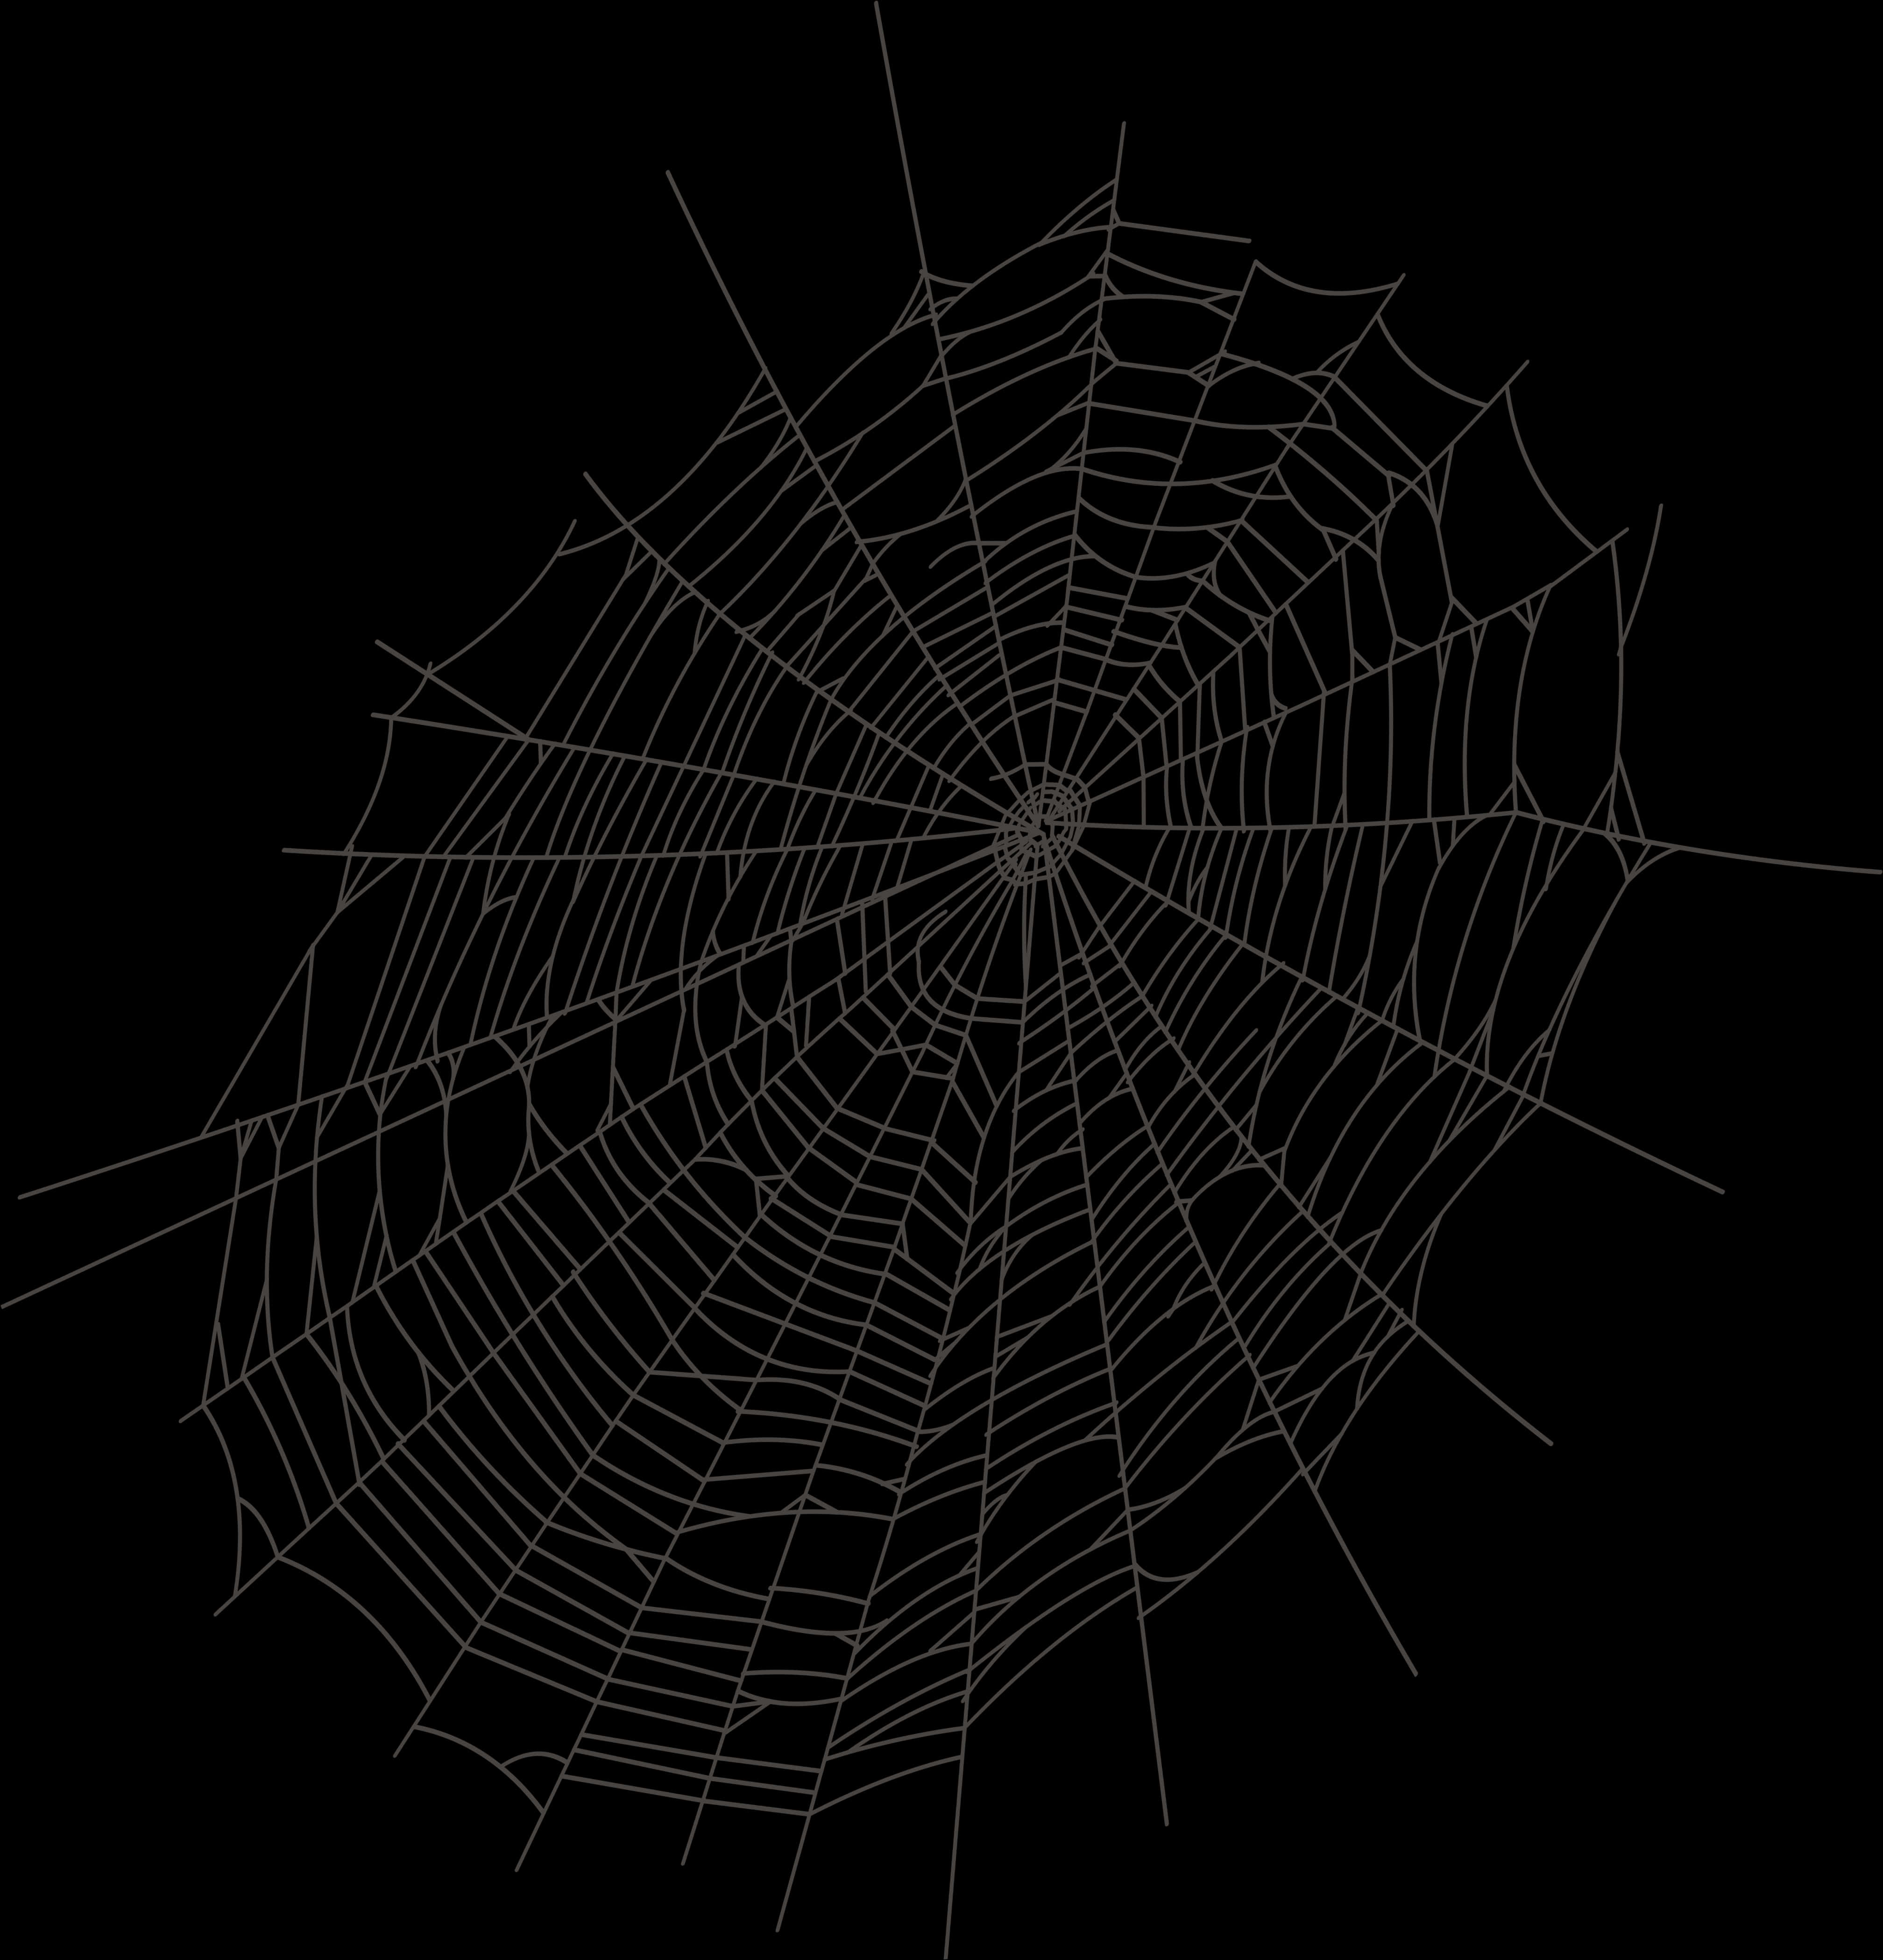 A Spider Web On A Black Background